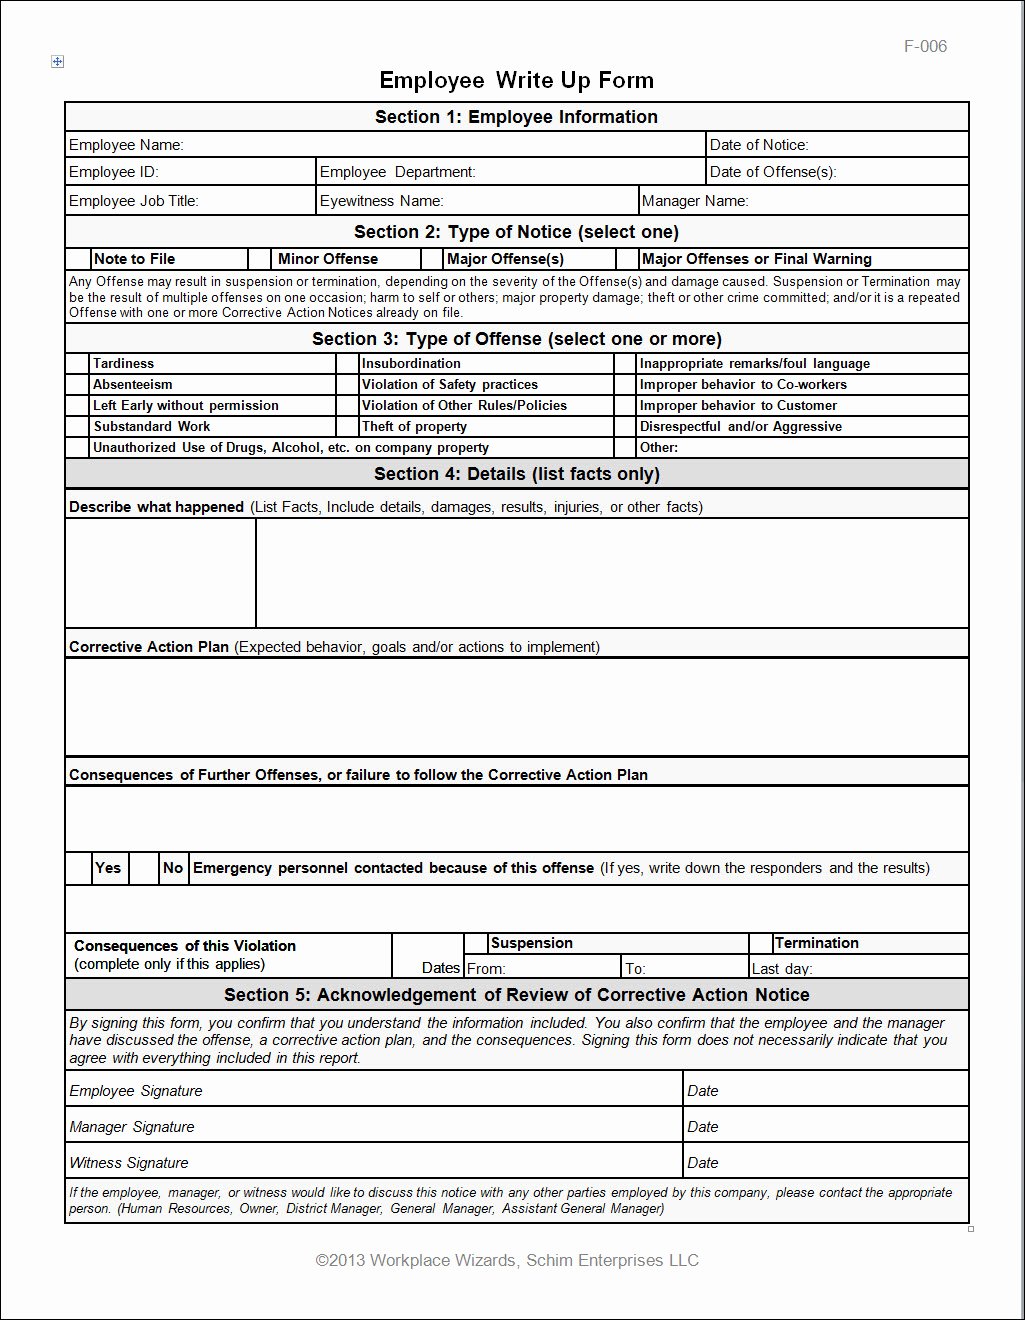 employee write up form 2